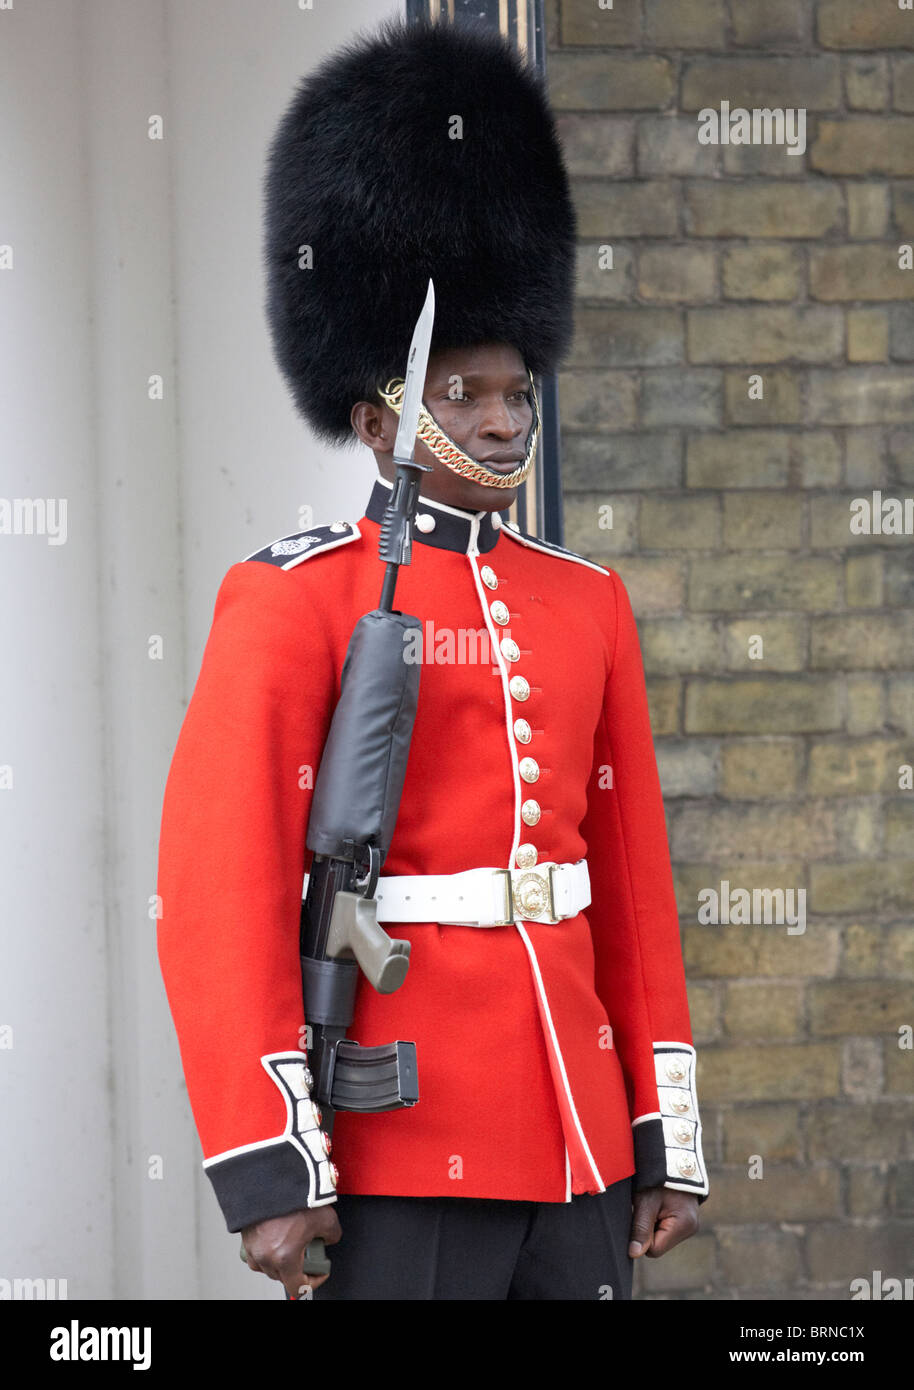 A Black Grenadier Royal Guard Soldier Clarence House London UK Europe Stock Photo